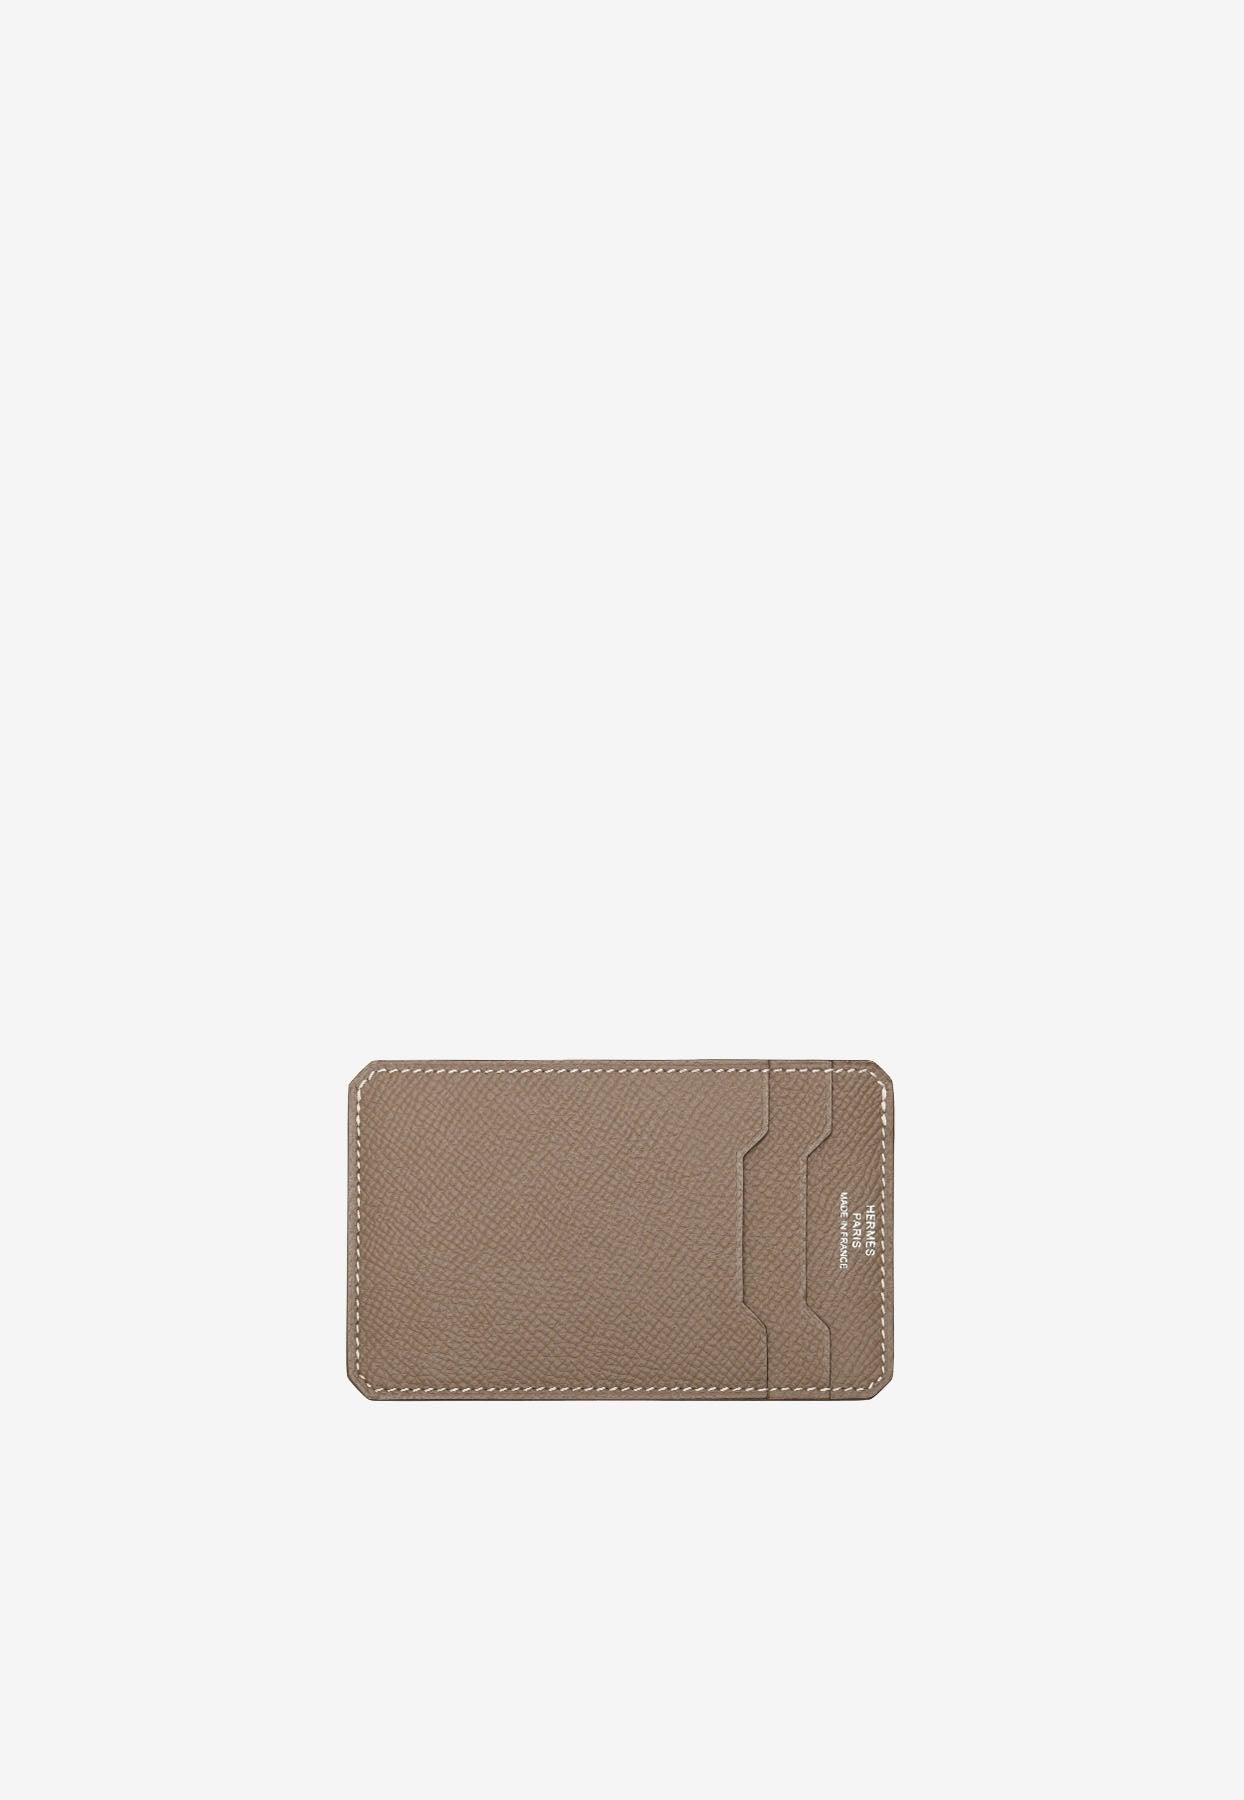 Hermès City 3CC Card Holder In-depth review and comparison. 